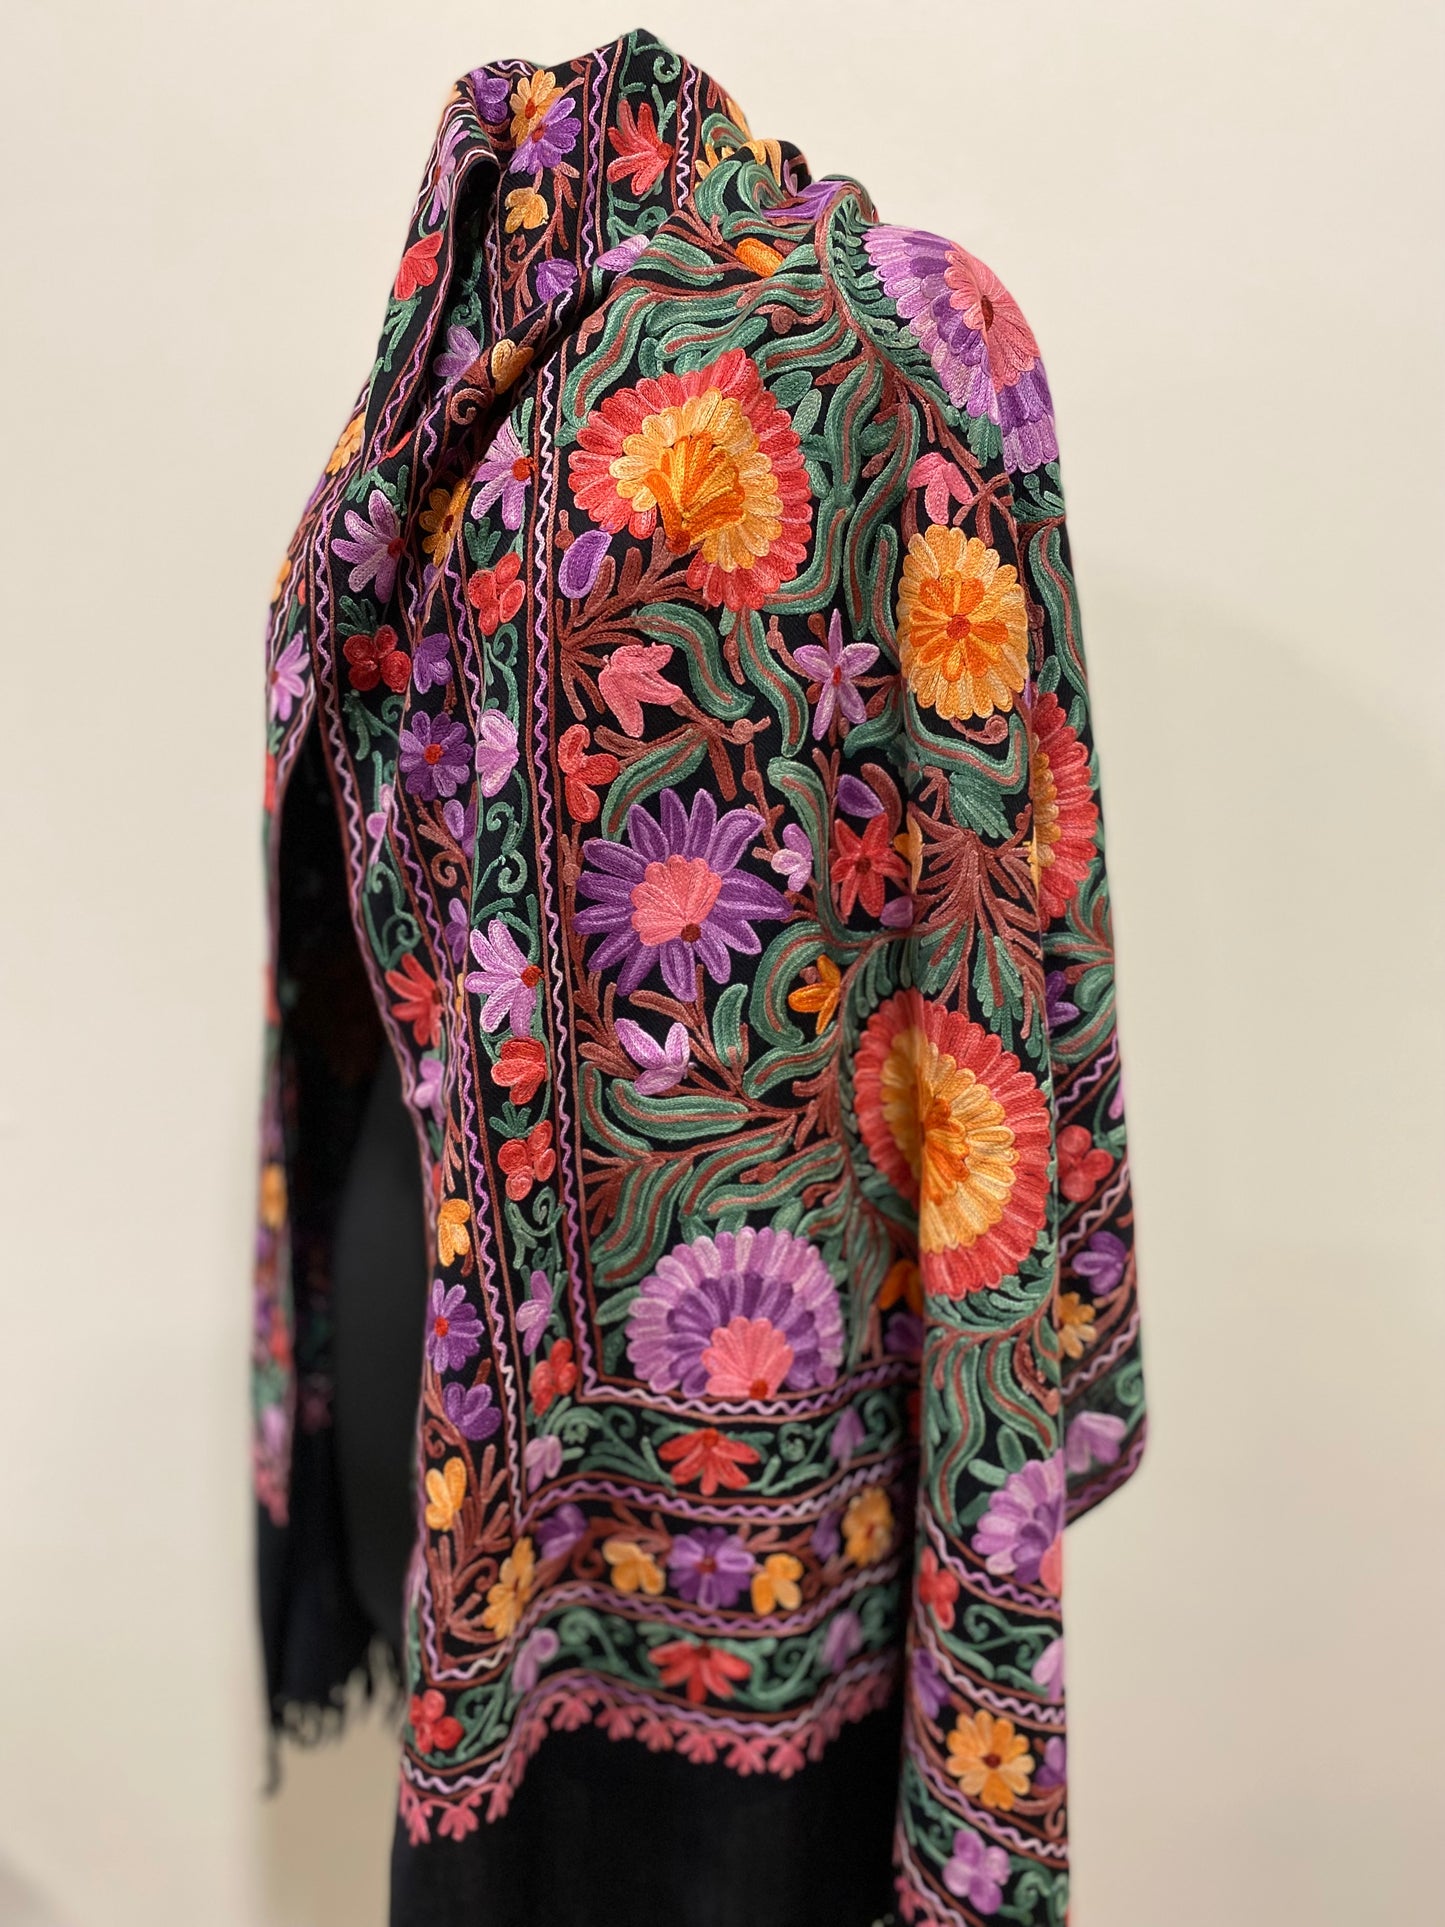 Shawl - Black Color Woolen Shawl with multi-color Aari embroidery